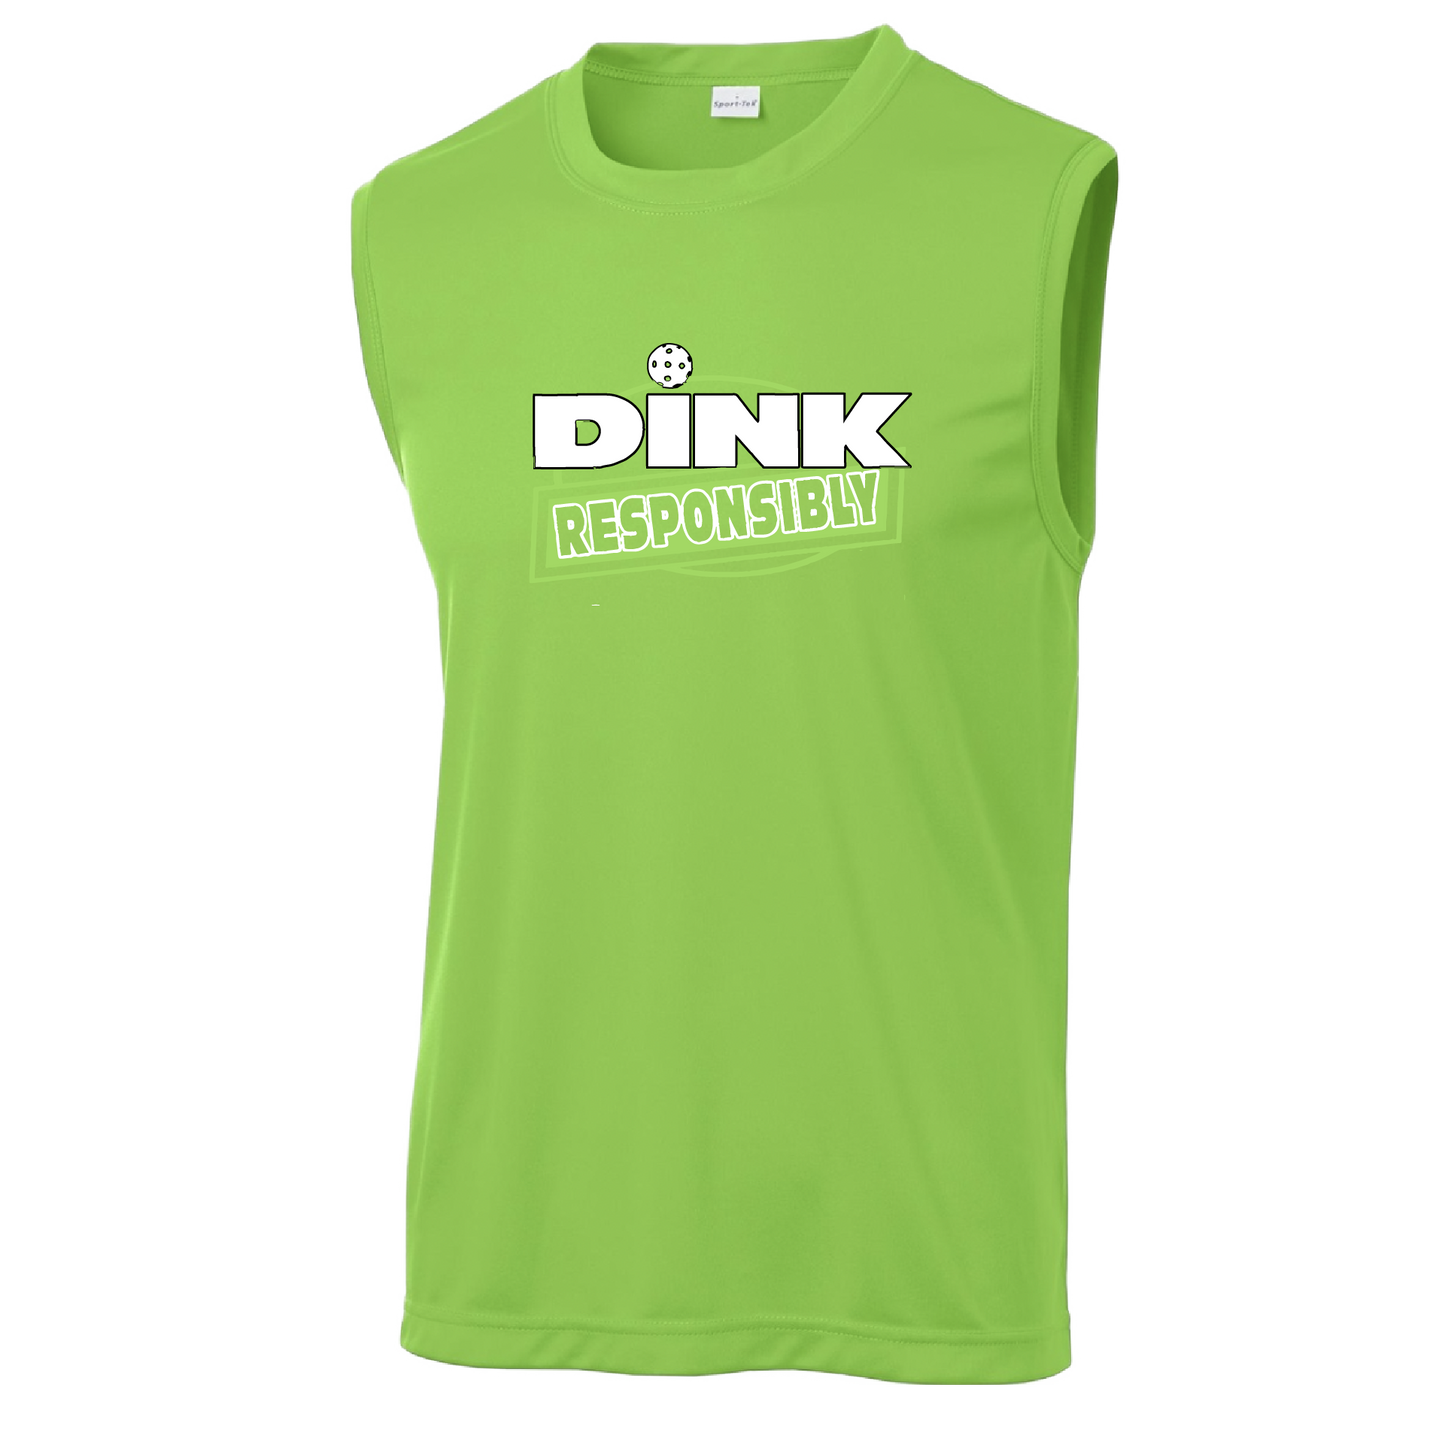 Pickleball Design: Dink Responsibly  Men's Styles: Sleeveless (SL)  Shirts are lightweight, roomy and highly breathable. These moisture-wicking shirts are designed for athletic performance. They feature PosiCharge technology to lock in color and prevent logos from fading. Removable tag and set-in sleeves for comfort.